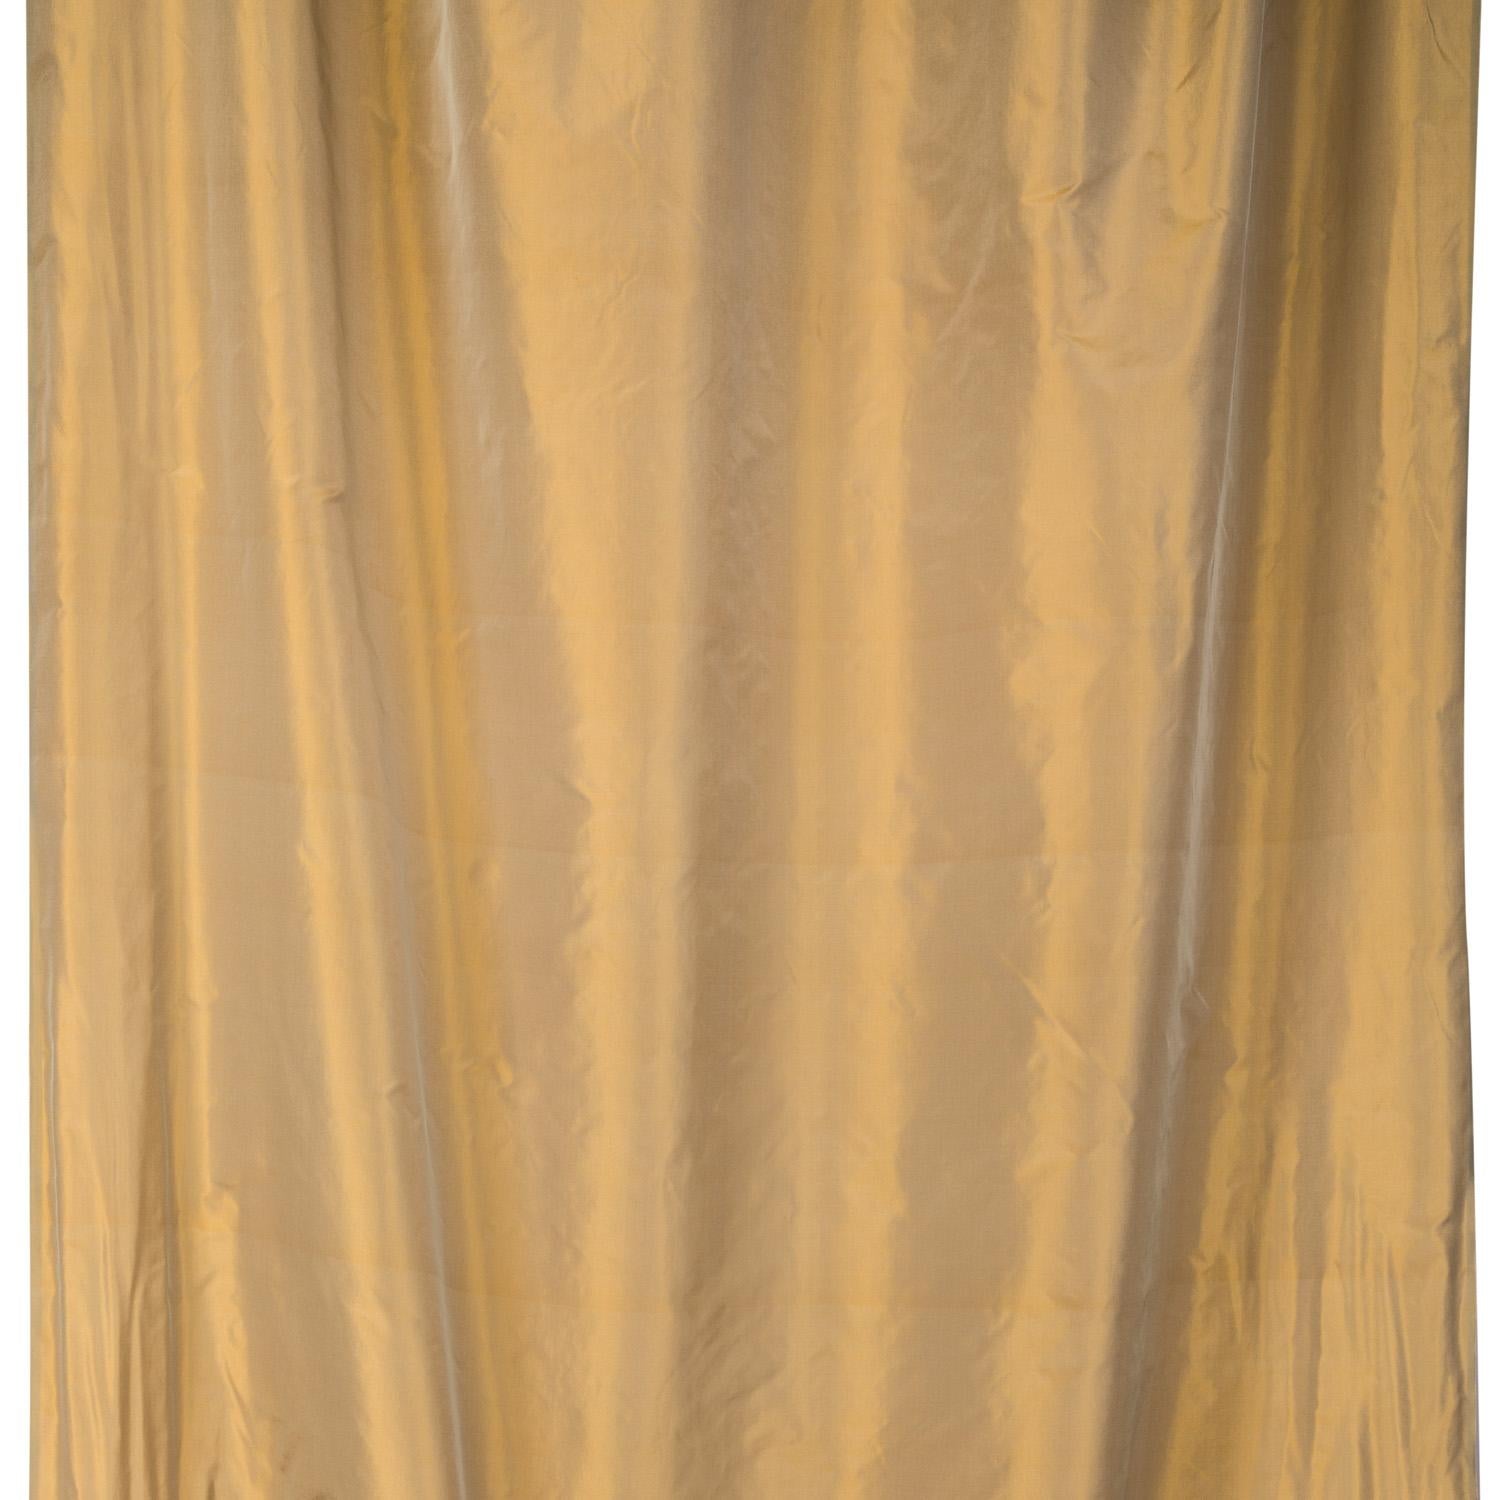 This is a semi mechanical Ermisino fabric, similar to a shot taffeta. It is woven on an original loom from the 1850s. The Ermisino fabric belongs to the Antico Setificio Fiorentino archives. This fabric can be used for light upholstery such as